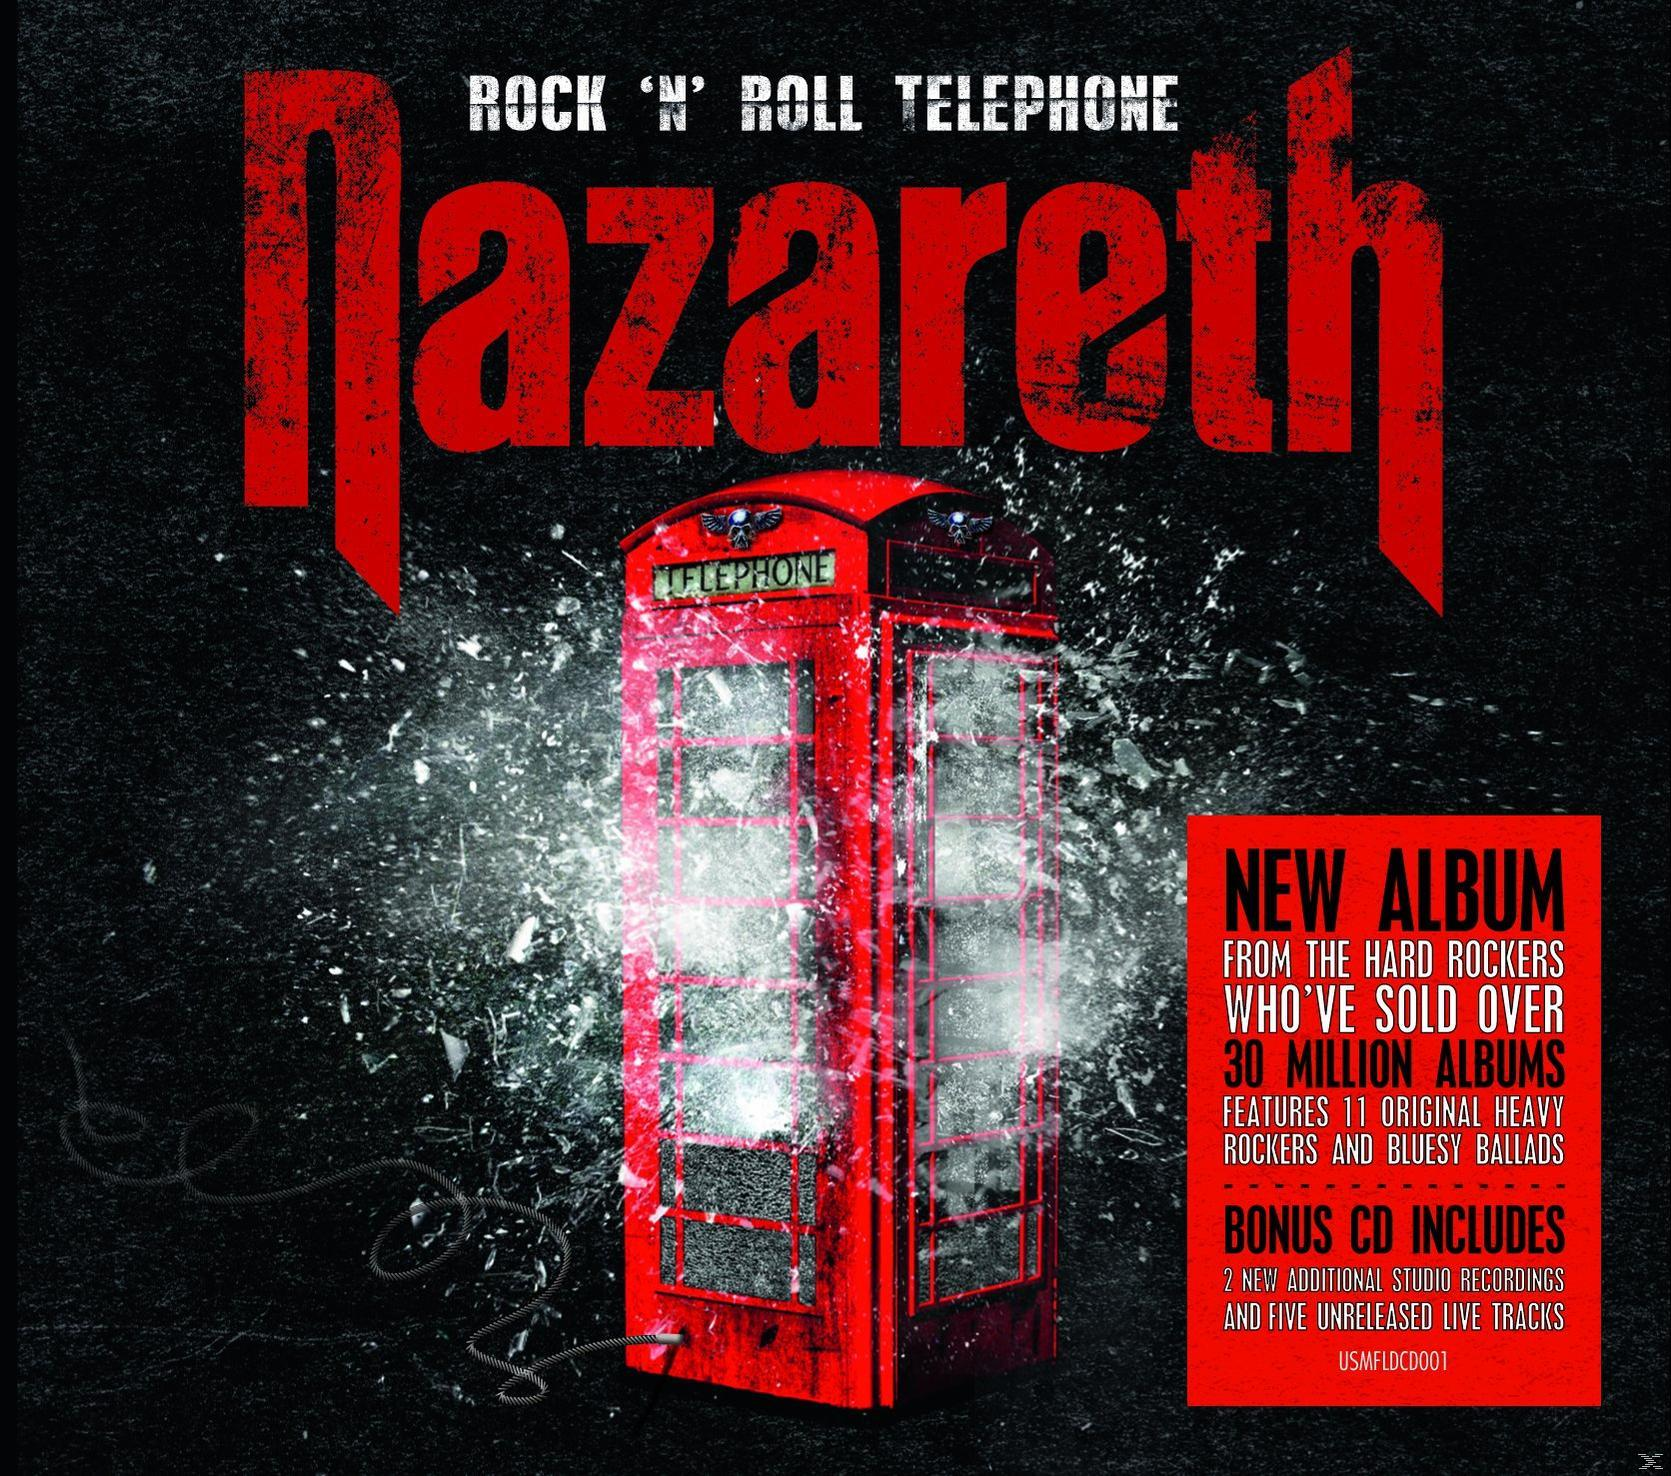 Rock\'n (2CD Nazareth Deluxe (CD) Roll Edition) - Telephone -